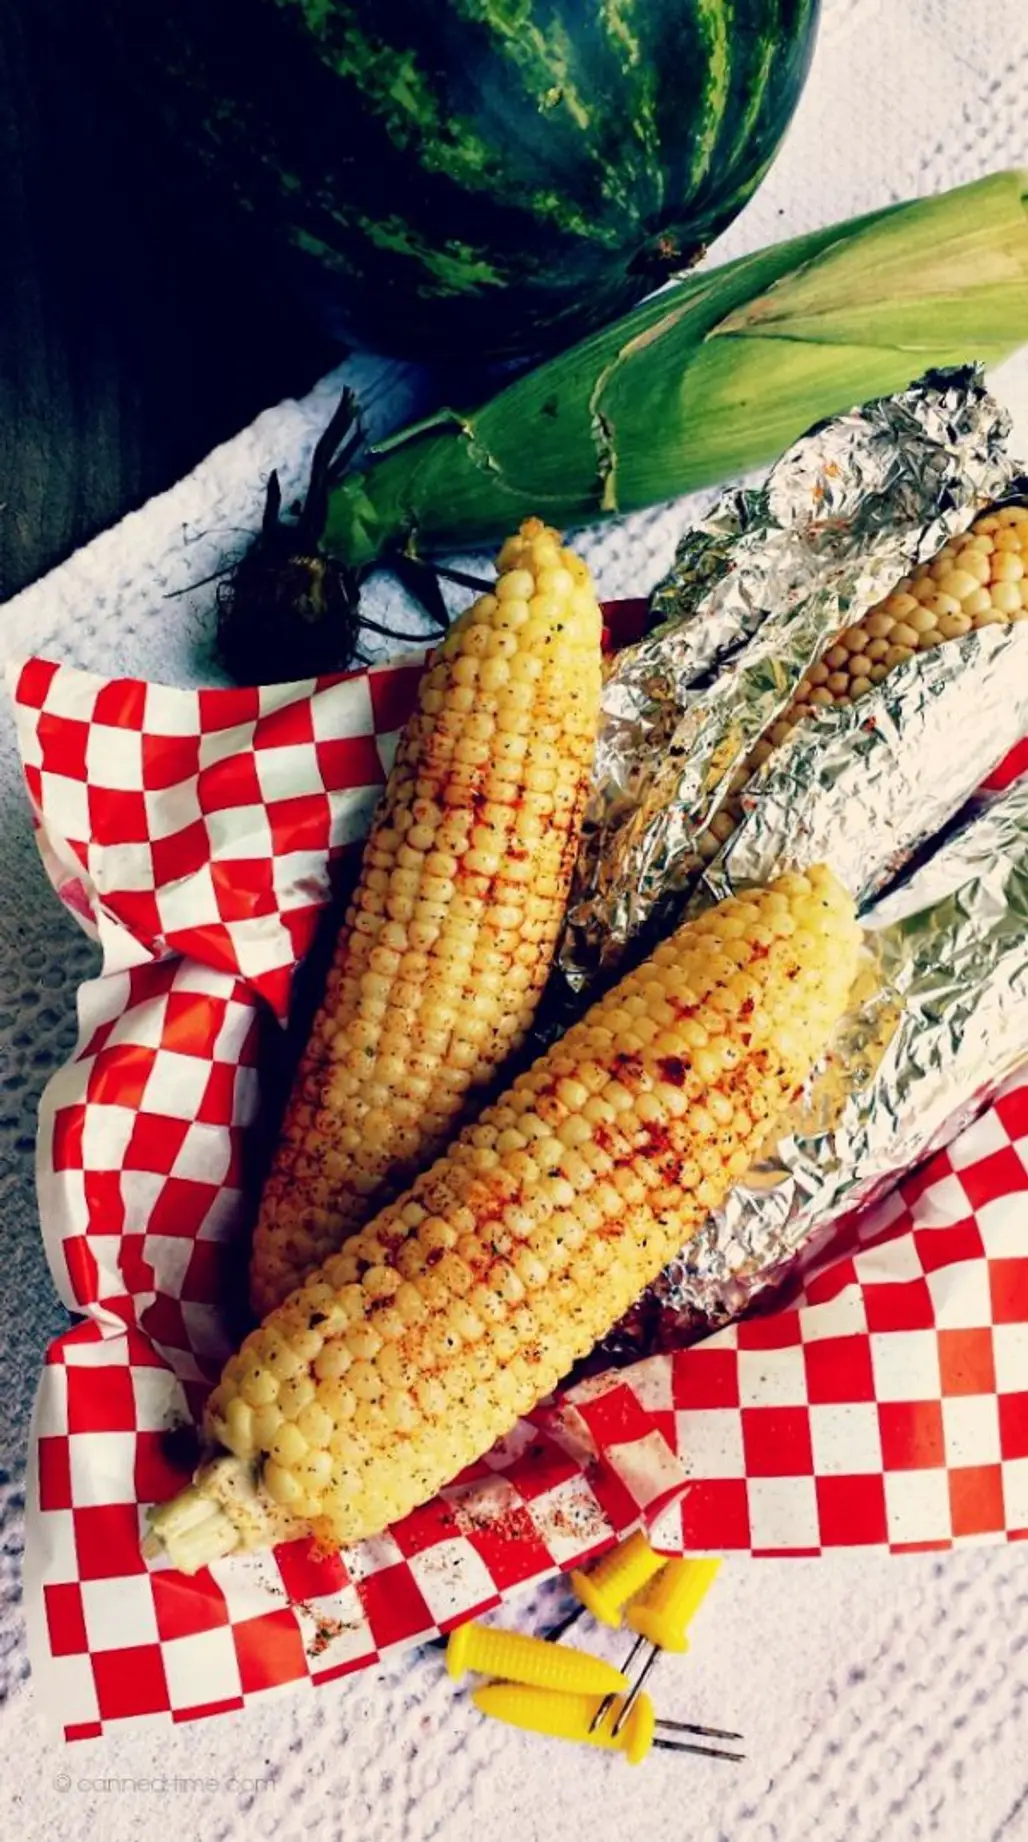 Freshly Grilled Corn on the Cob